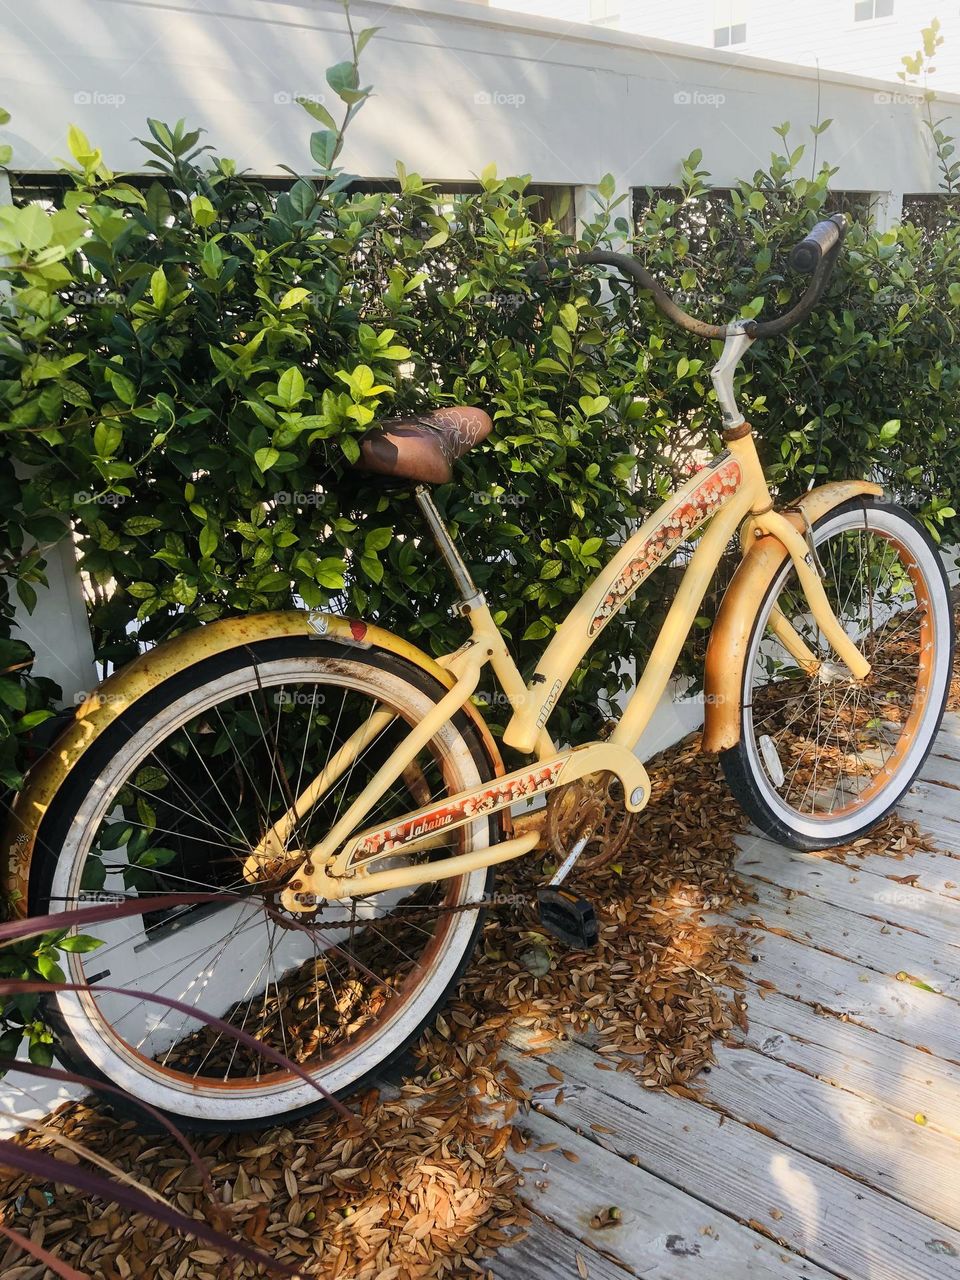 Classic style beach cruiser bicycle. It is yellow with floral design, brown seat and parked on a wooden boardwalk beside shrubbery.